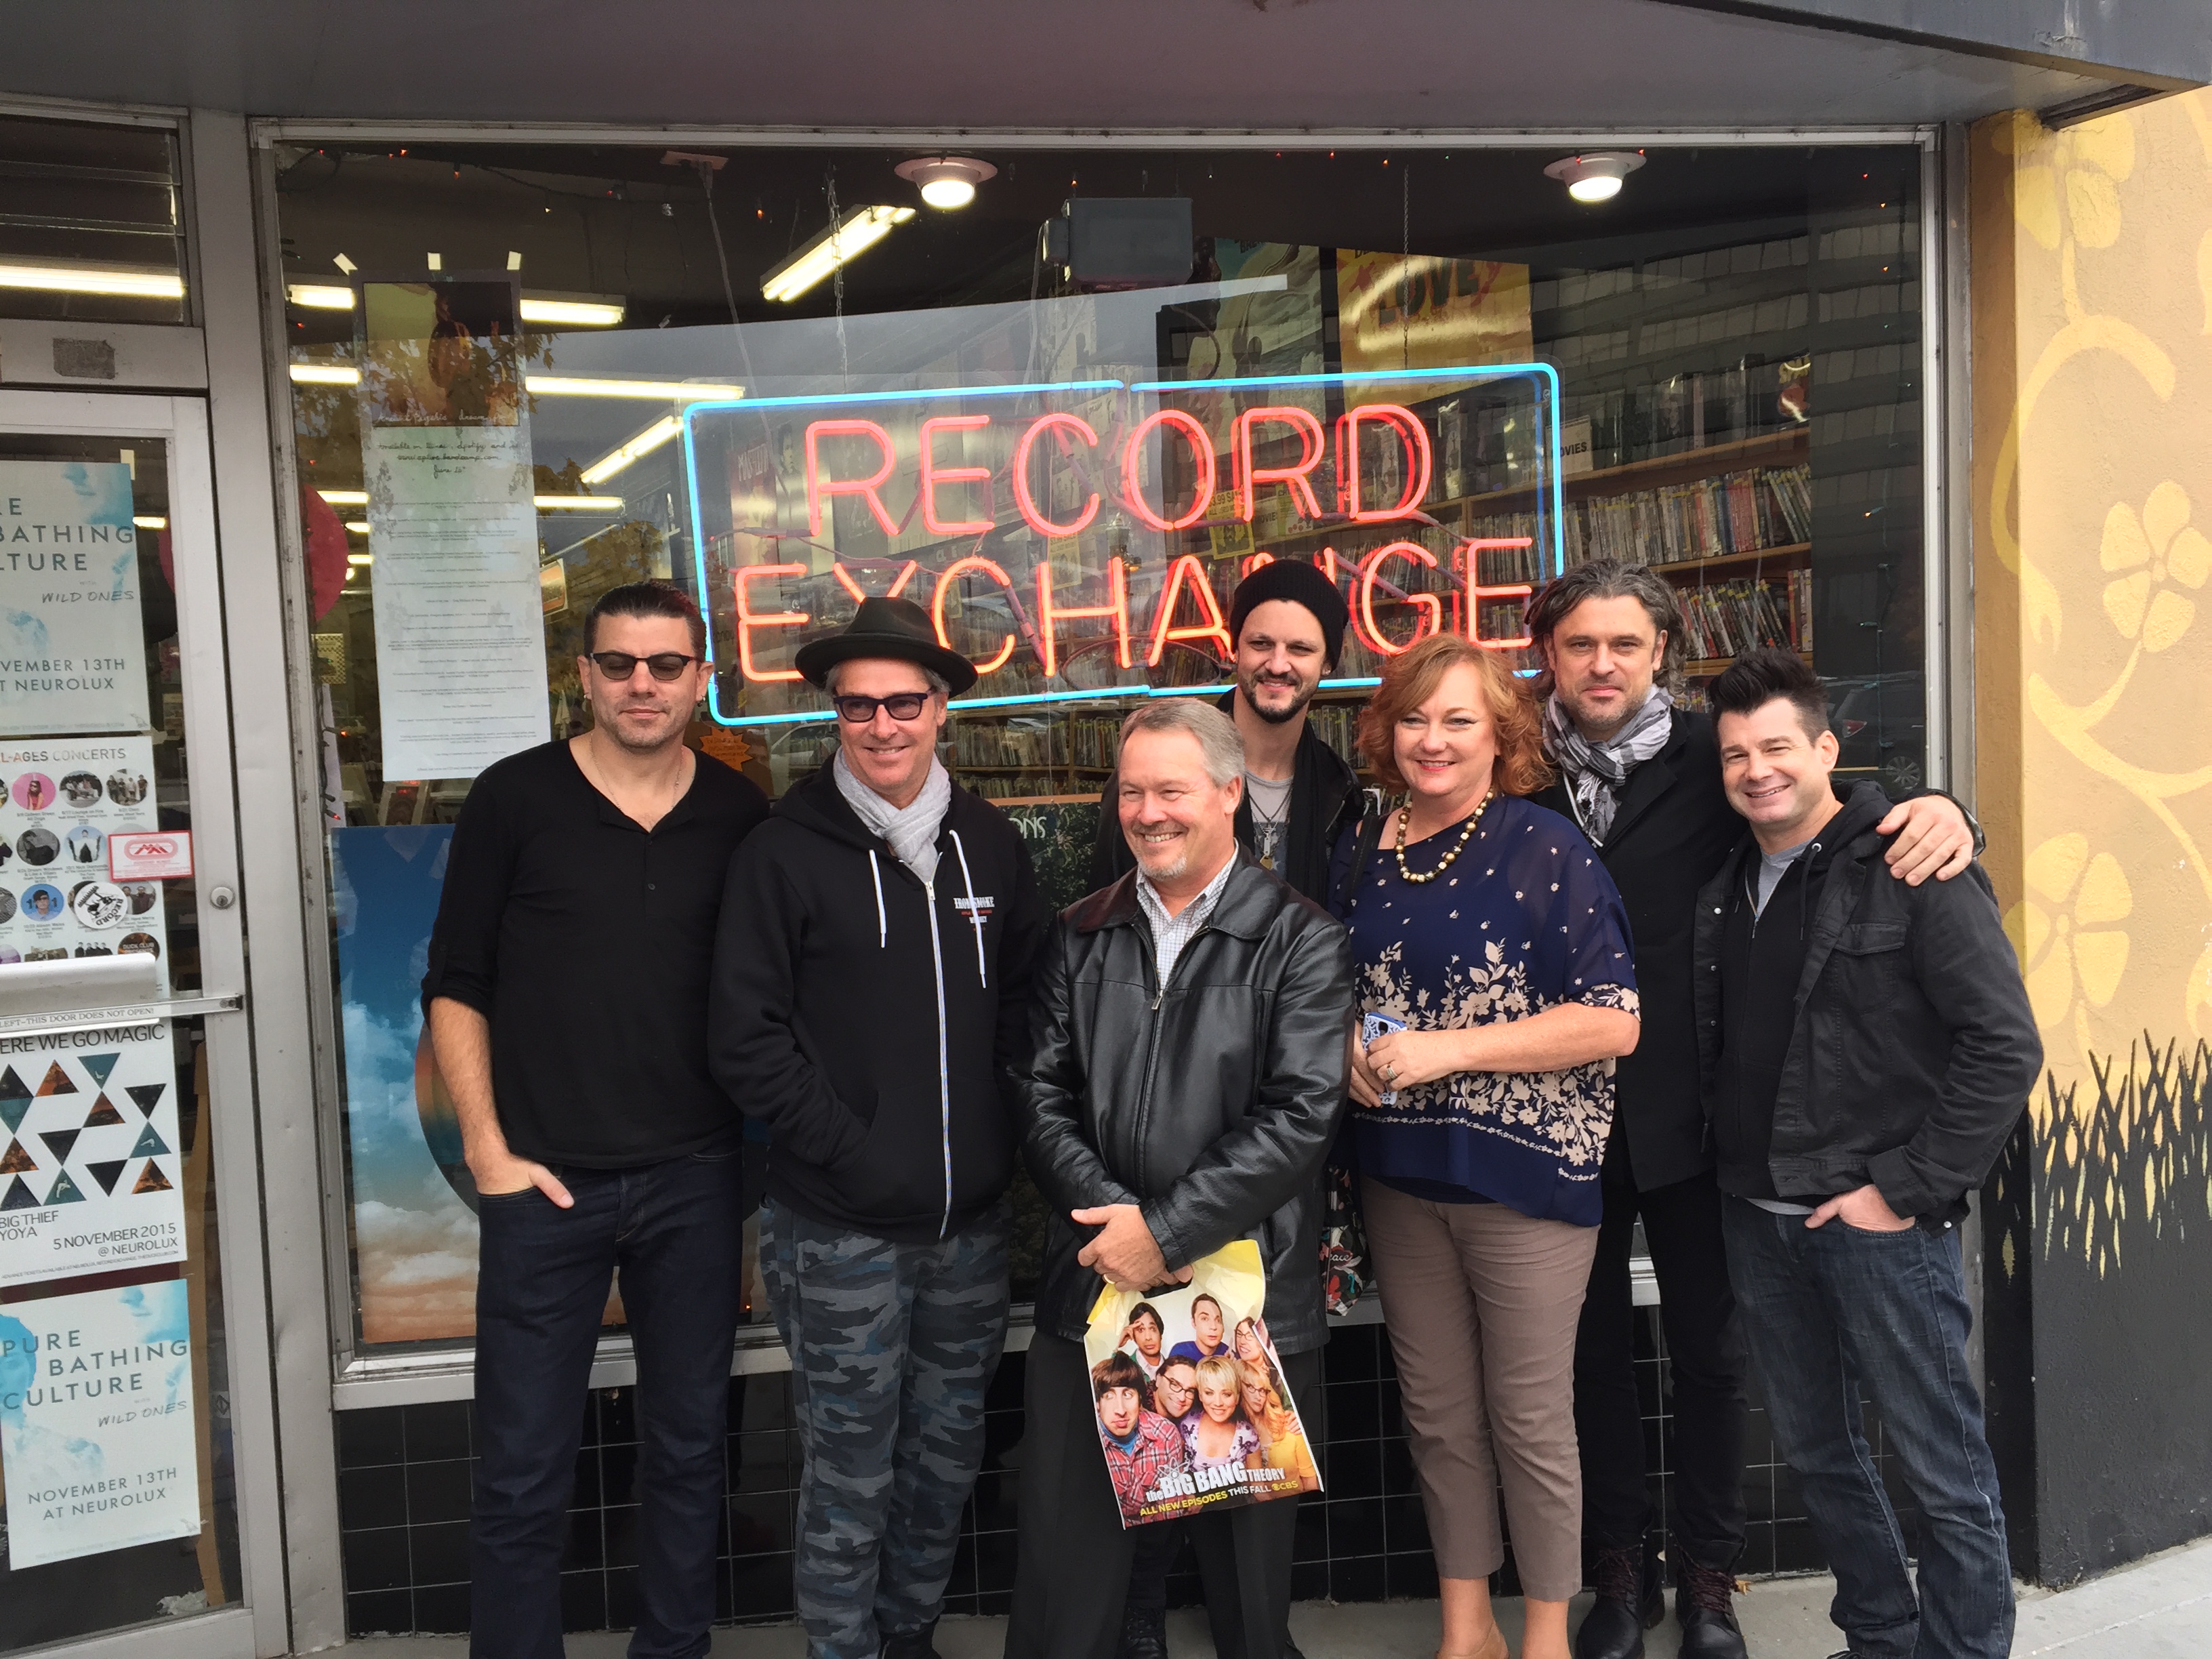 Music Shopping With Collective Soul at The Record Exchange